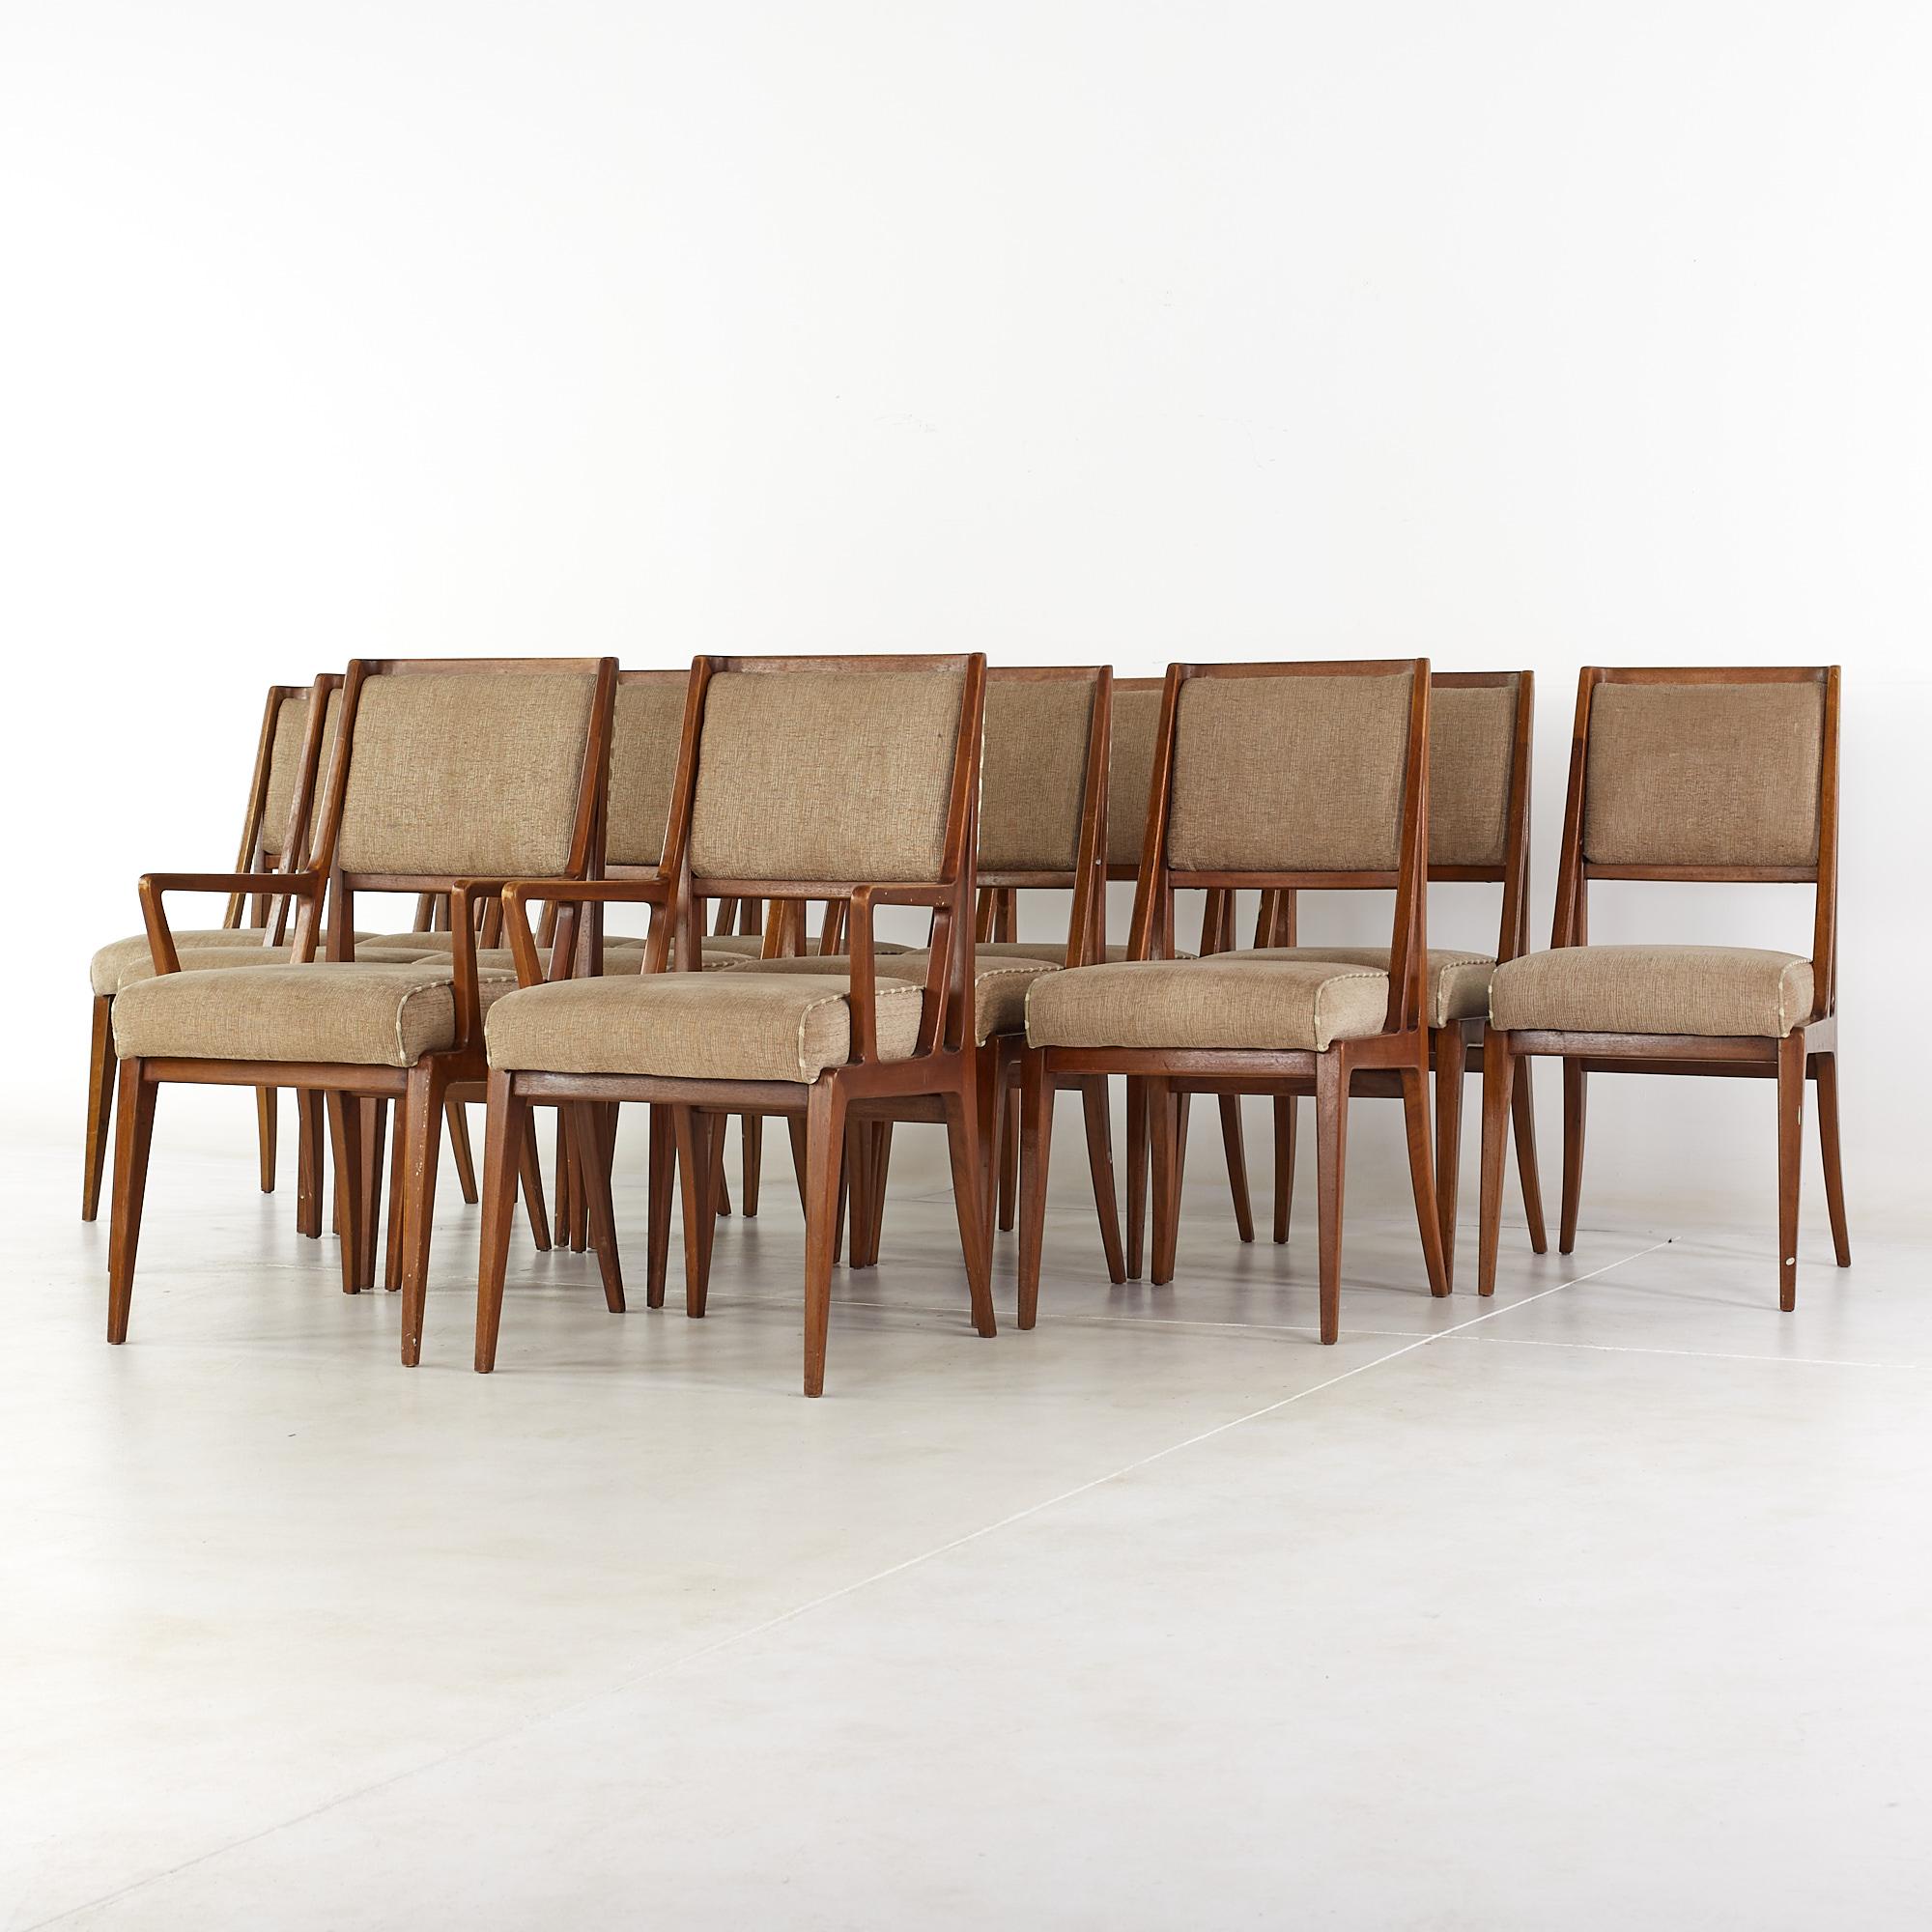 Gio Ponti for Singer and Sons mid-century dining chairs - set of 12.

Each armless chair measures: 19 wide x 23 deep x 37.5 high, with a seat height of 20 inches.
Each captains chair measures: 21.25 wide x 24 deep x 37.5 high, with a seat height